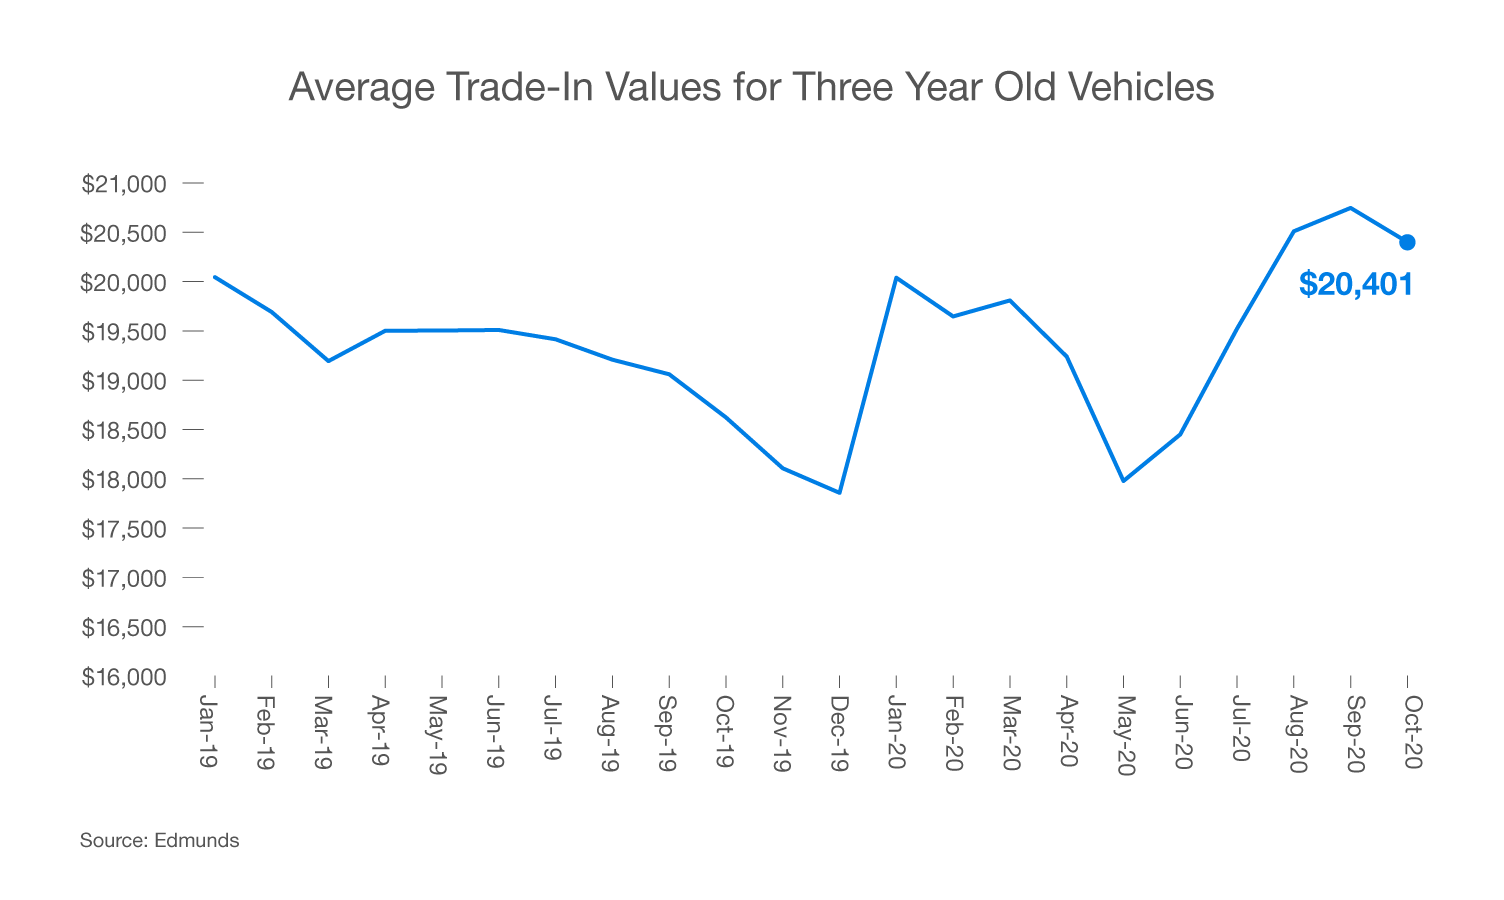 Used Car Values Are Starting to Drop After Record Highs